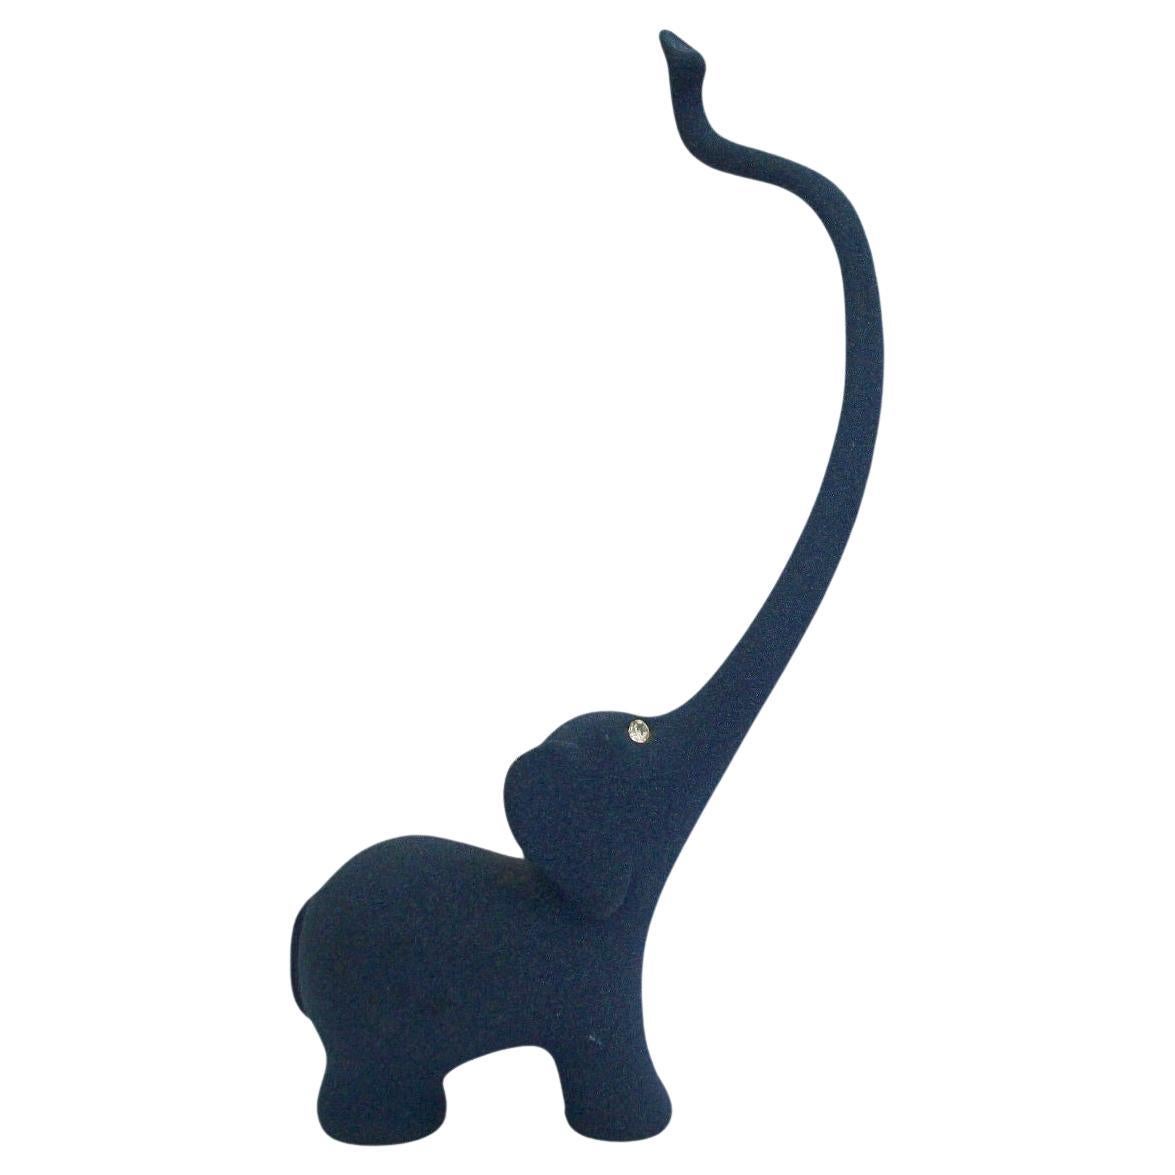 Vintage Elephant Ring Holder - Cast Metal with Powder Coat - 20th Century